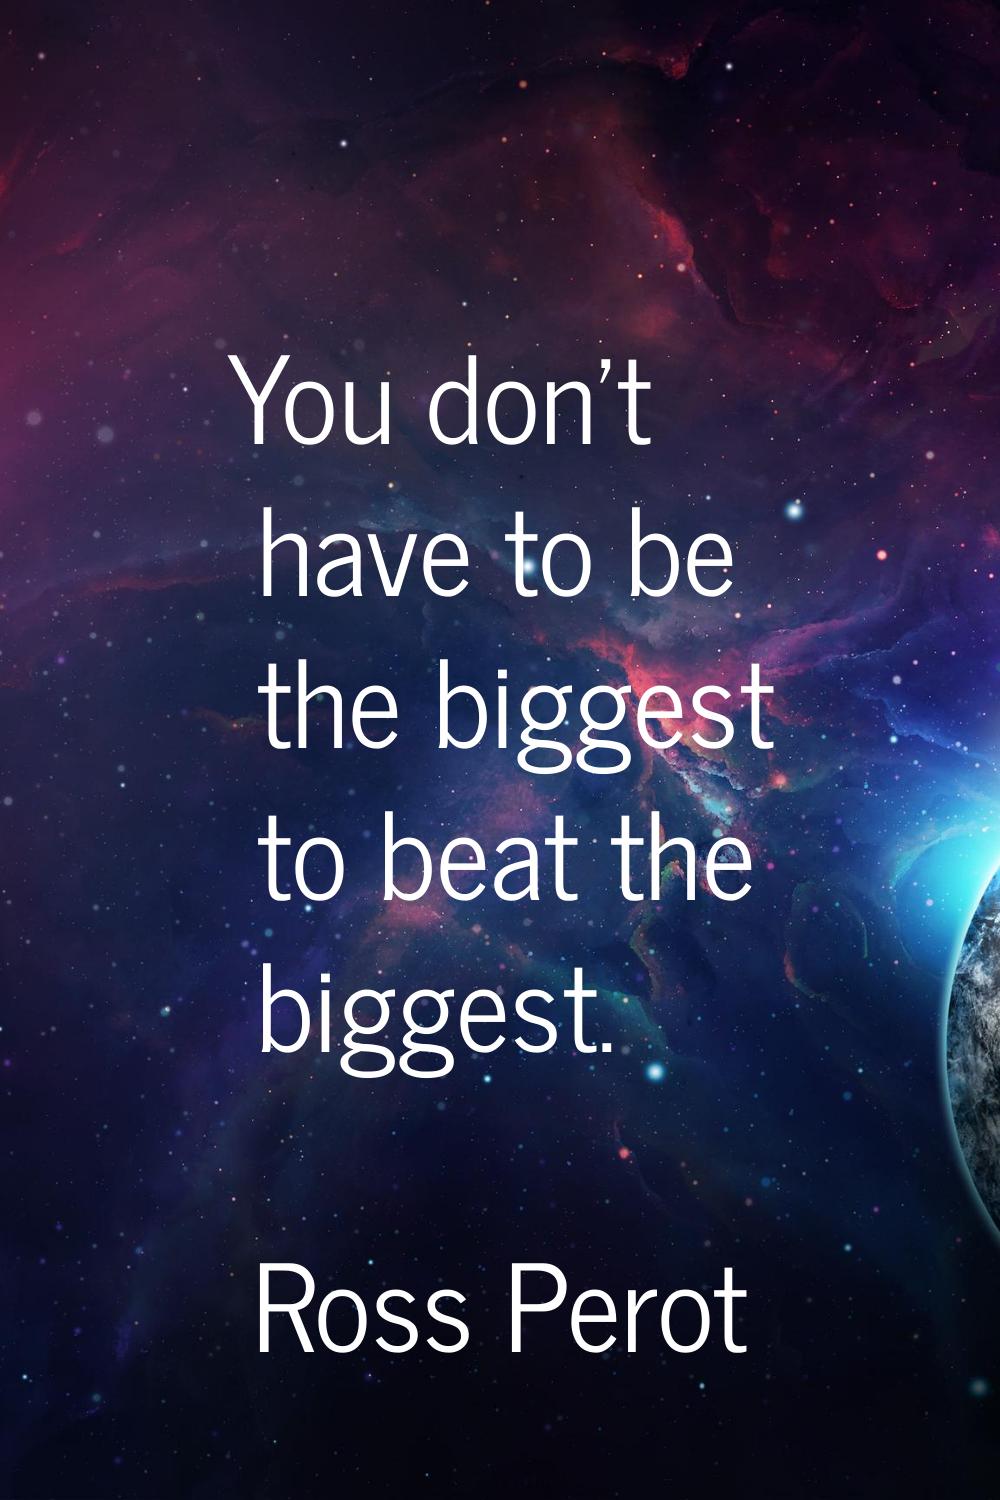 You don't have to be the biggest to beat the biggest.